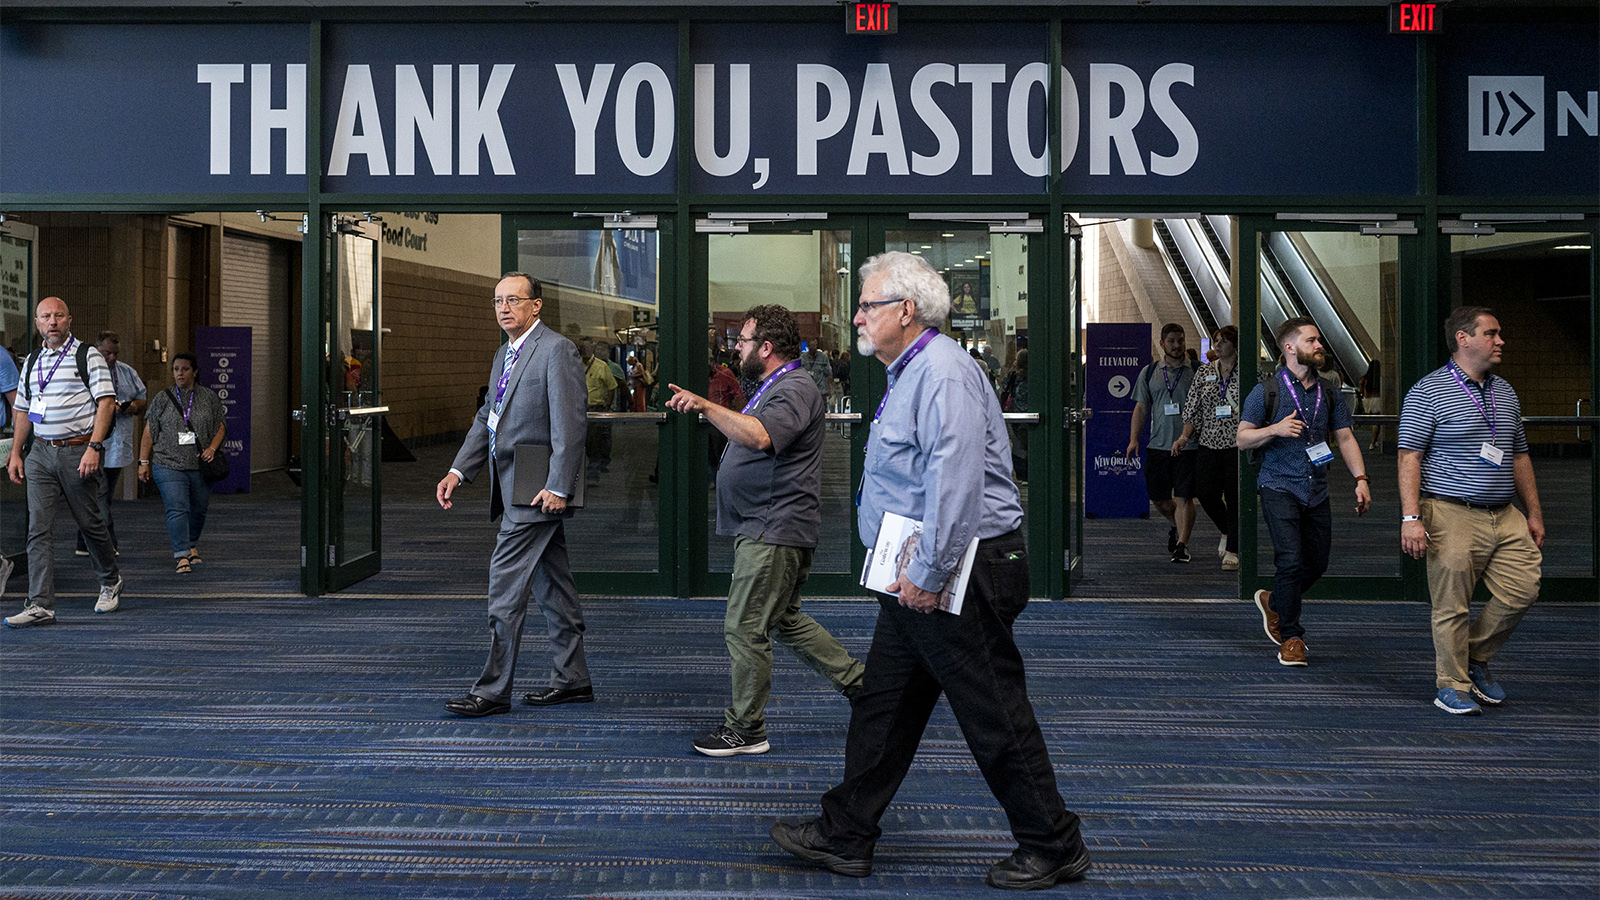 Attendees pass through the Ernest N. Morial Convention Center during the Southern Baptist Convention annual meeting in New Orleans, Wednesday, June 14, 2023. RNS photo by Emily Kask